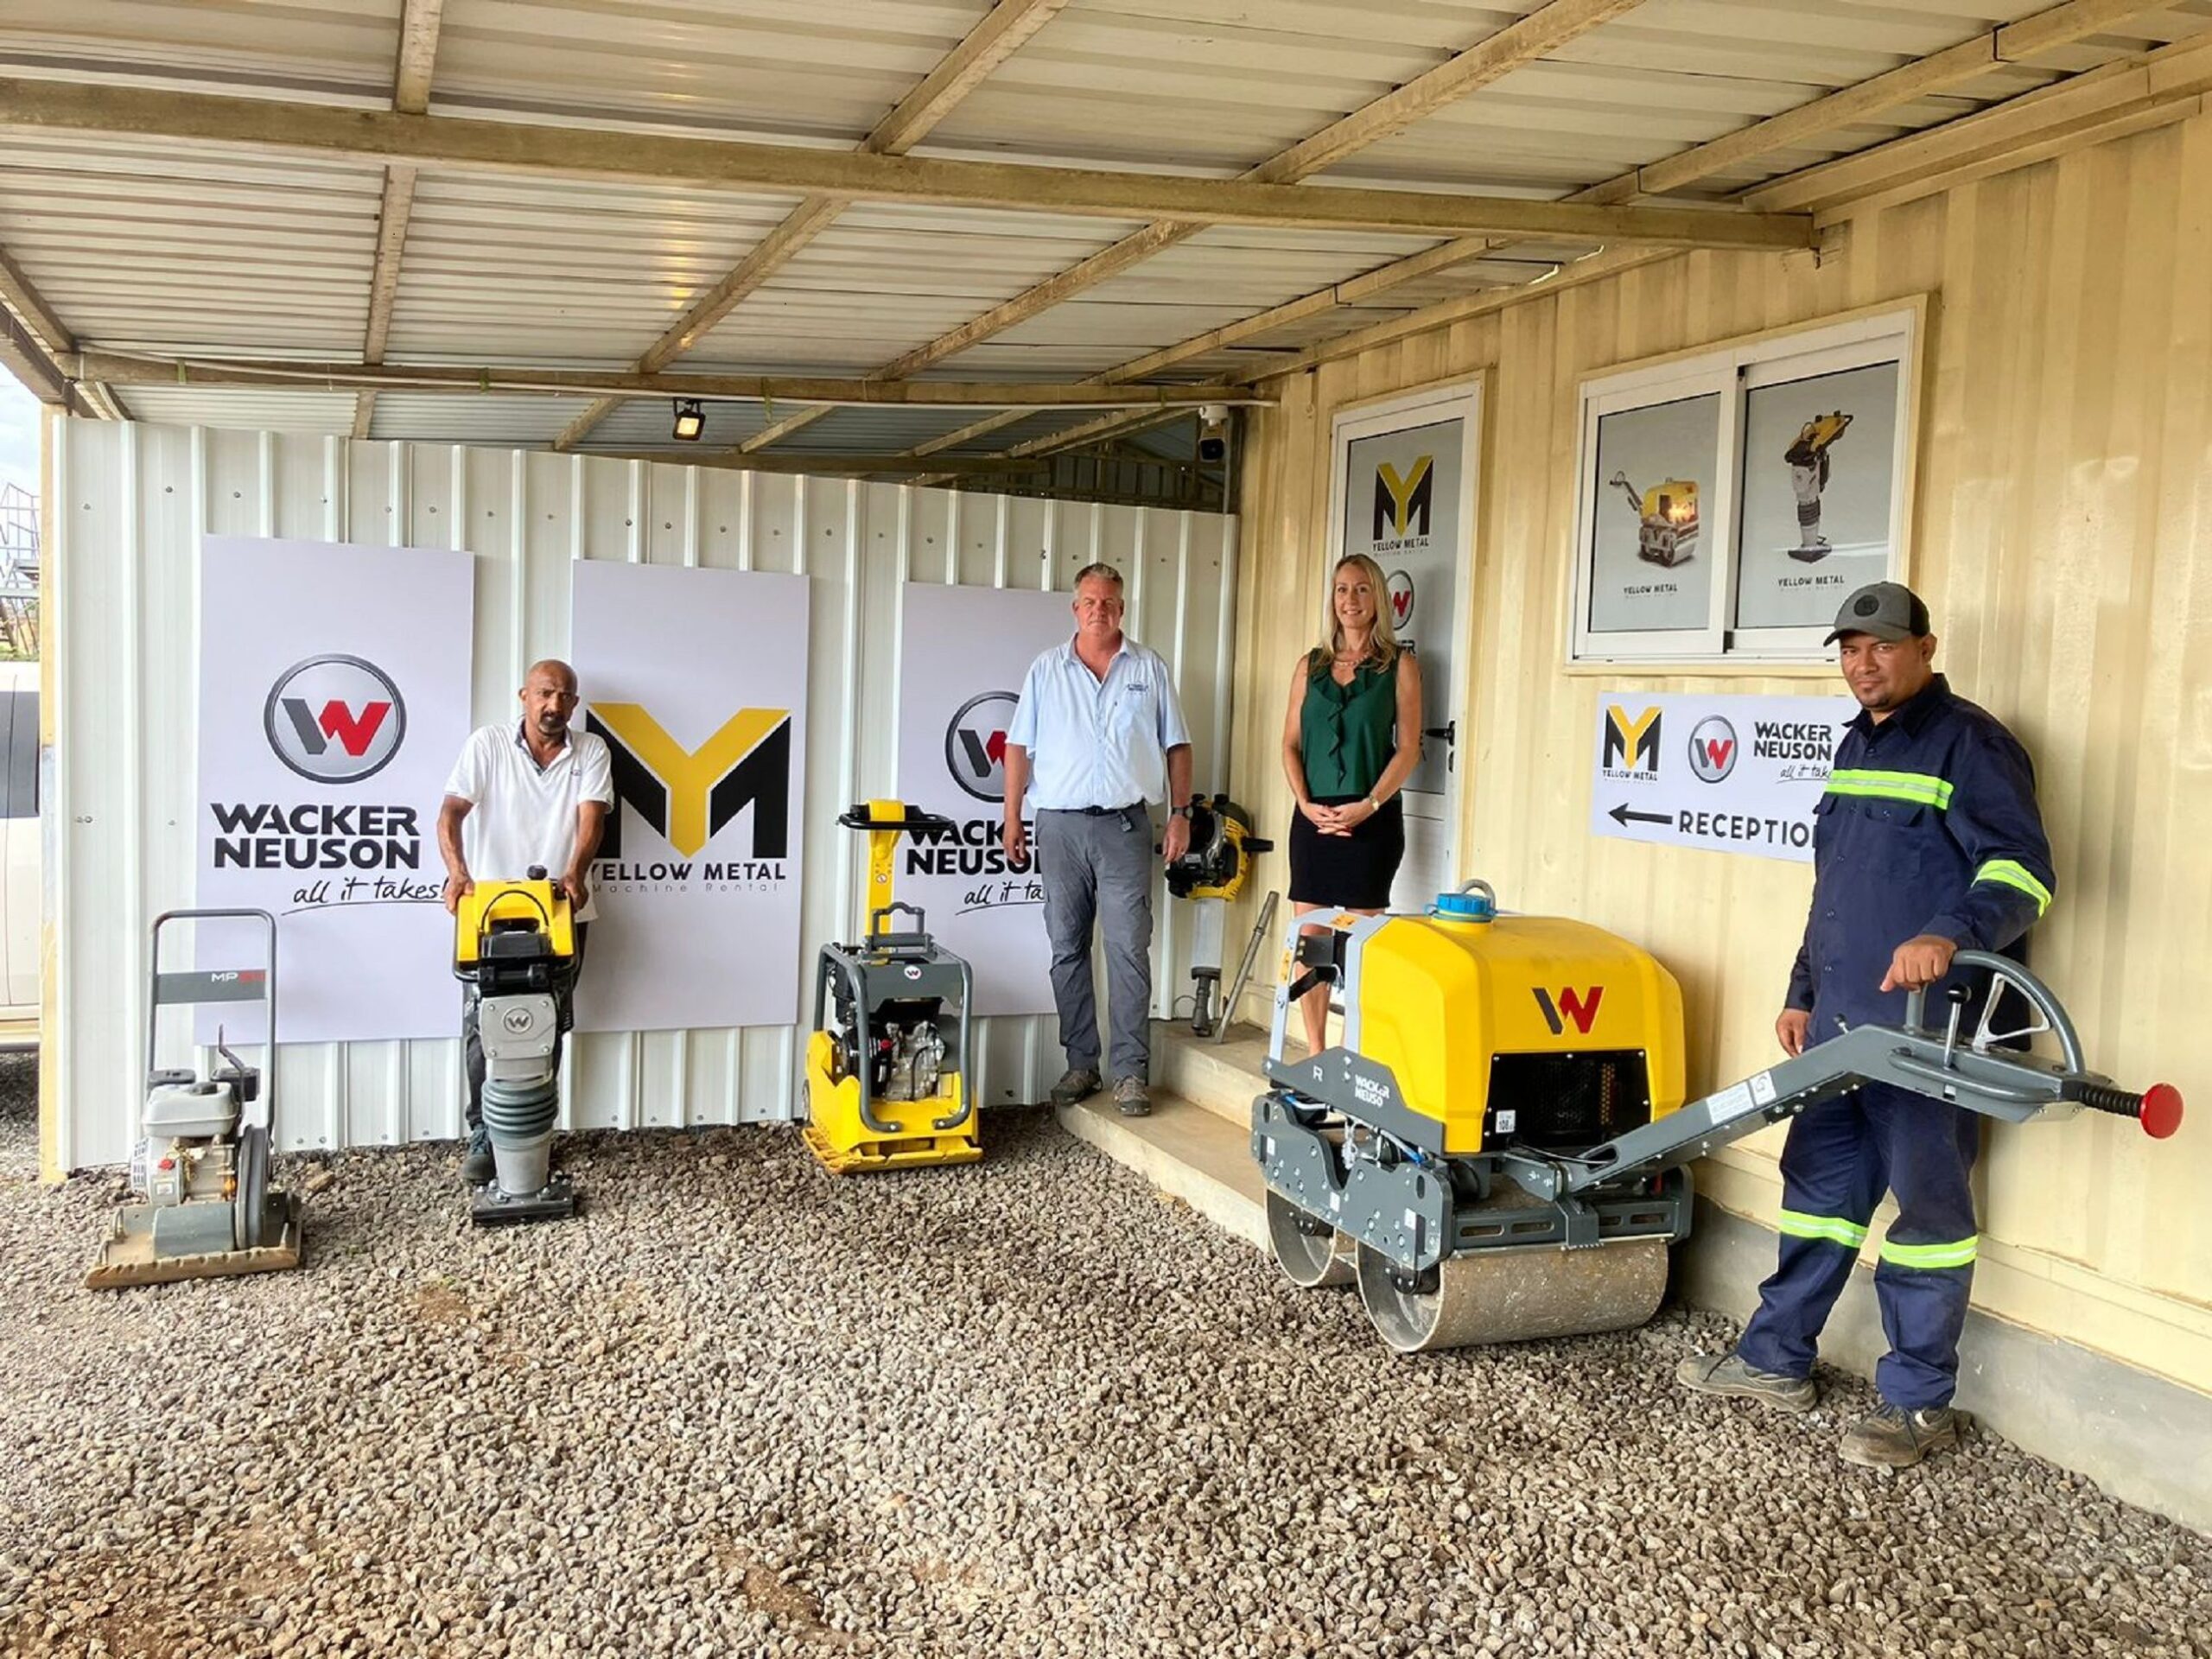 From left: Siris Apajee, Dave & Gail Alcock and Pascal Manique with some of the Wacker Neuson equipment.